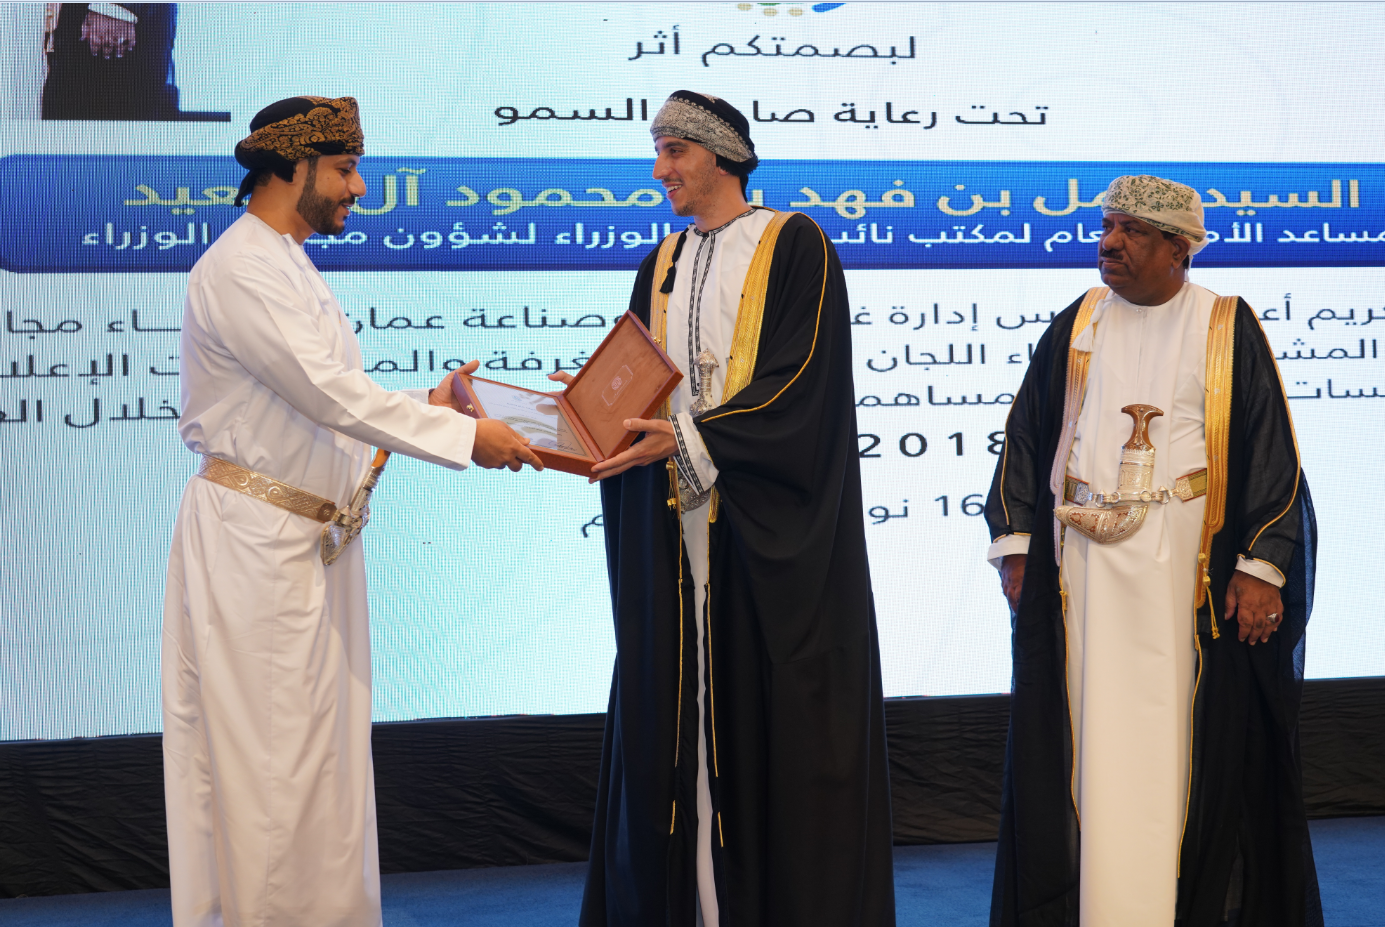 Daleel receives an acknowledgement for its Social Responsibility